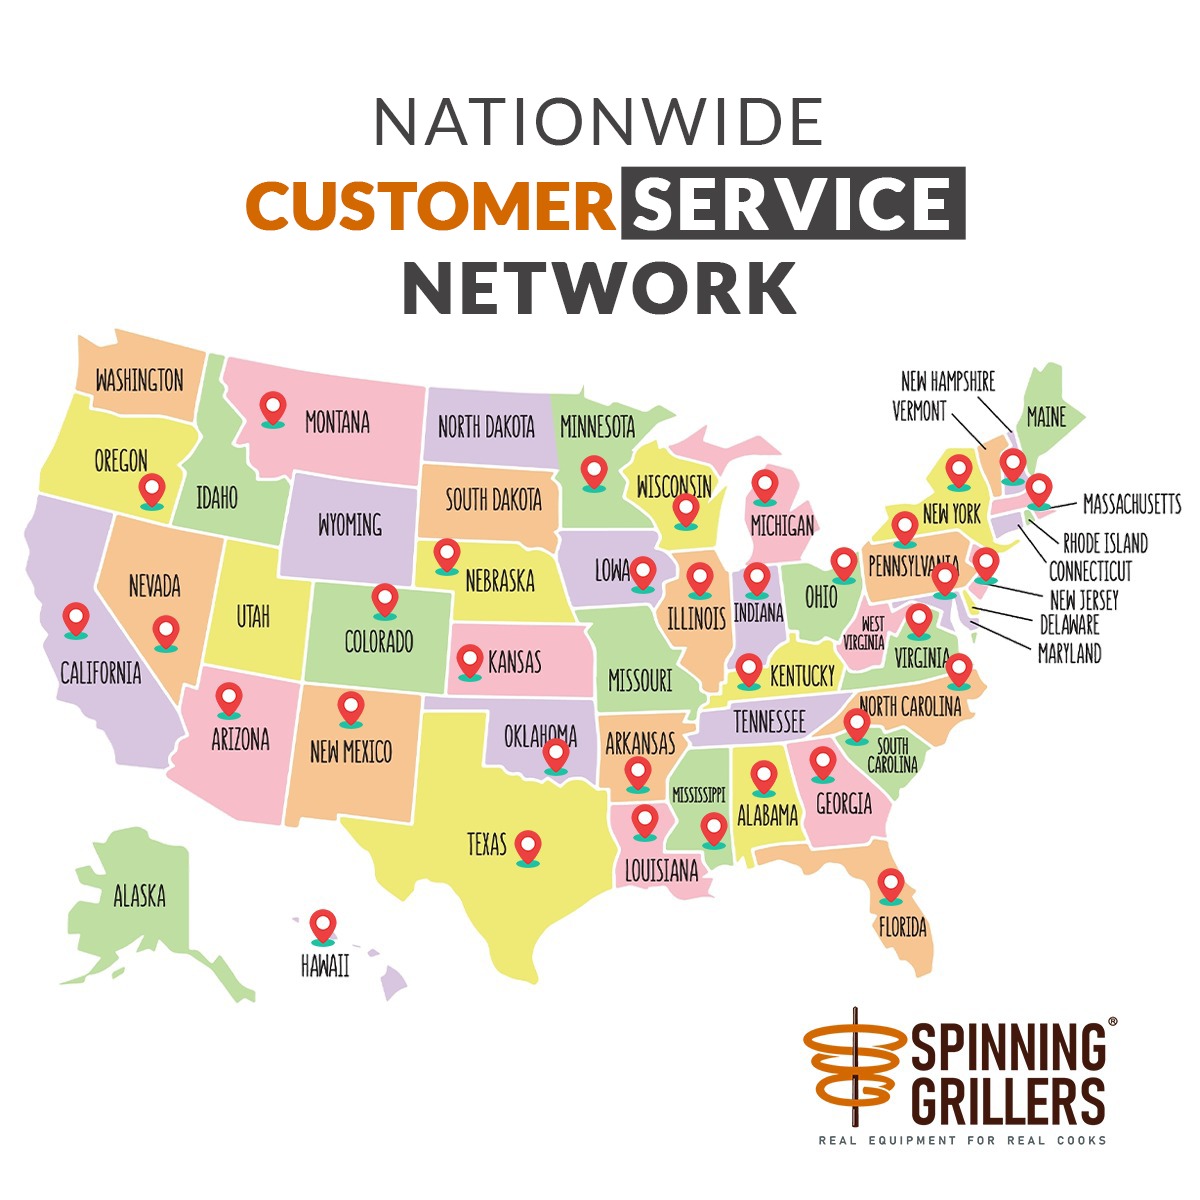 At Spinning Grillers, customer satisfaction is our top priority. Our dedicated team is here to support you at every step, ensuring your experience with us is nothing short of exceptional. ow.ly/2bvx50RpV3f

#CustomerService #SupportNetwork #DedicatedTeam #CustomerSupport 🤝